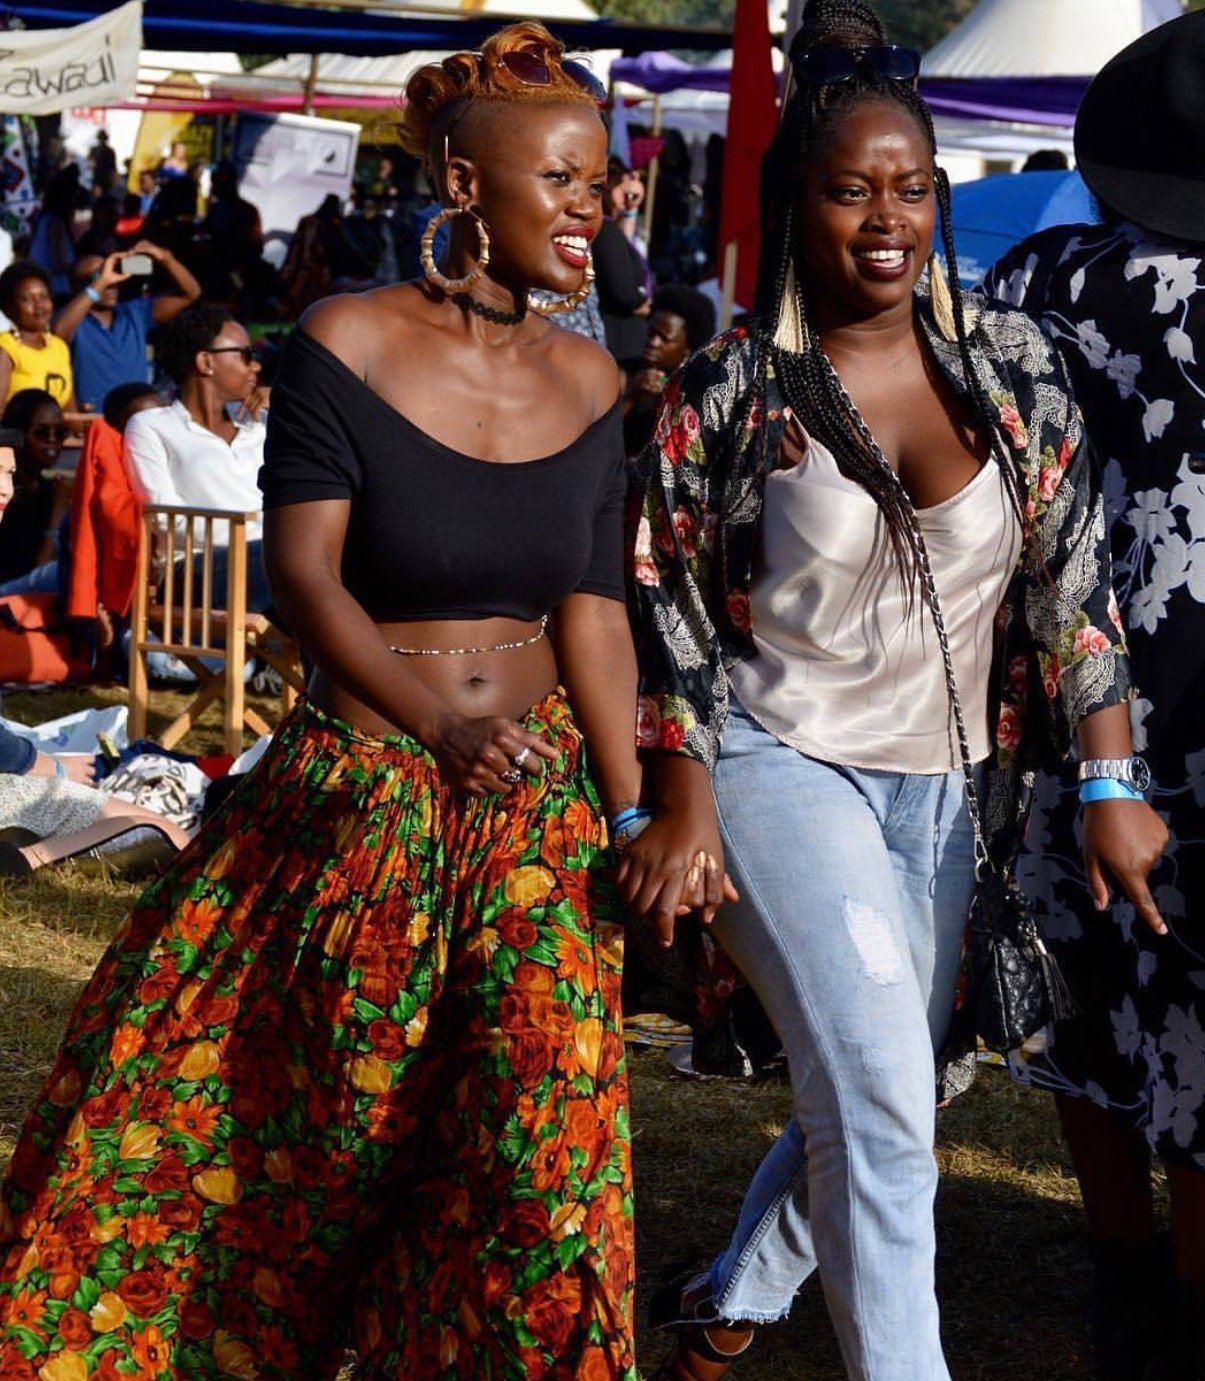 From men to women; Blankets&Wines was all about lit fashionable street Style, fun and amazing performances!